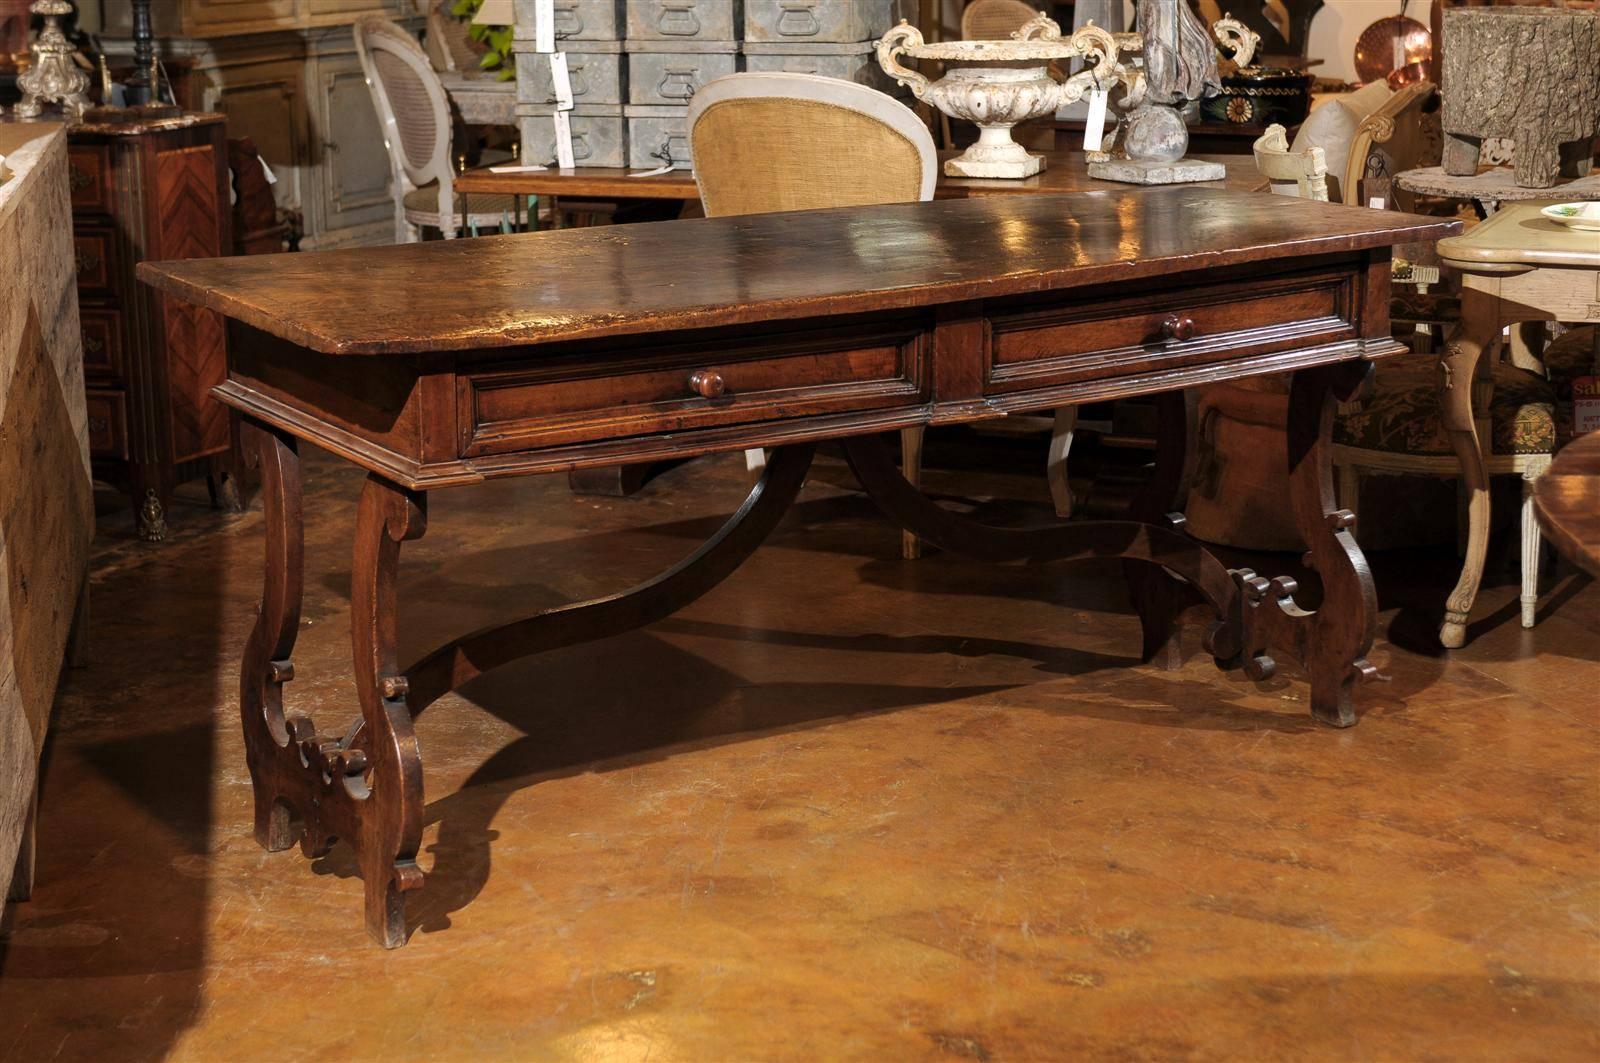 This Italian walnut Baroque style desk from the late 19th century features a rectangular top over two drawers with wooden pulls, resting on a slightly beveled molding. The eye is immediately drawn to the hand-carved lyre shaped legs with their